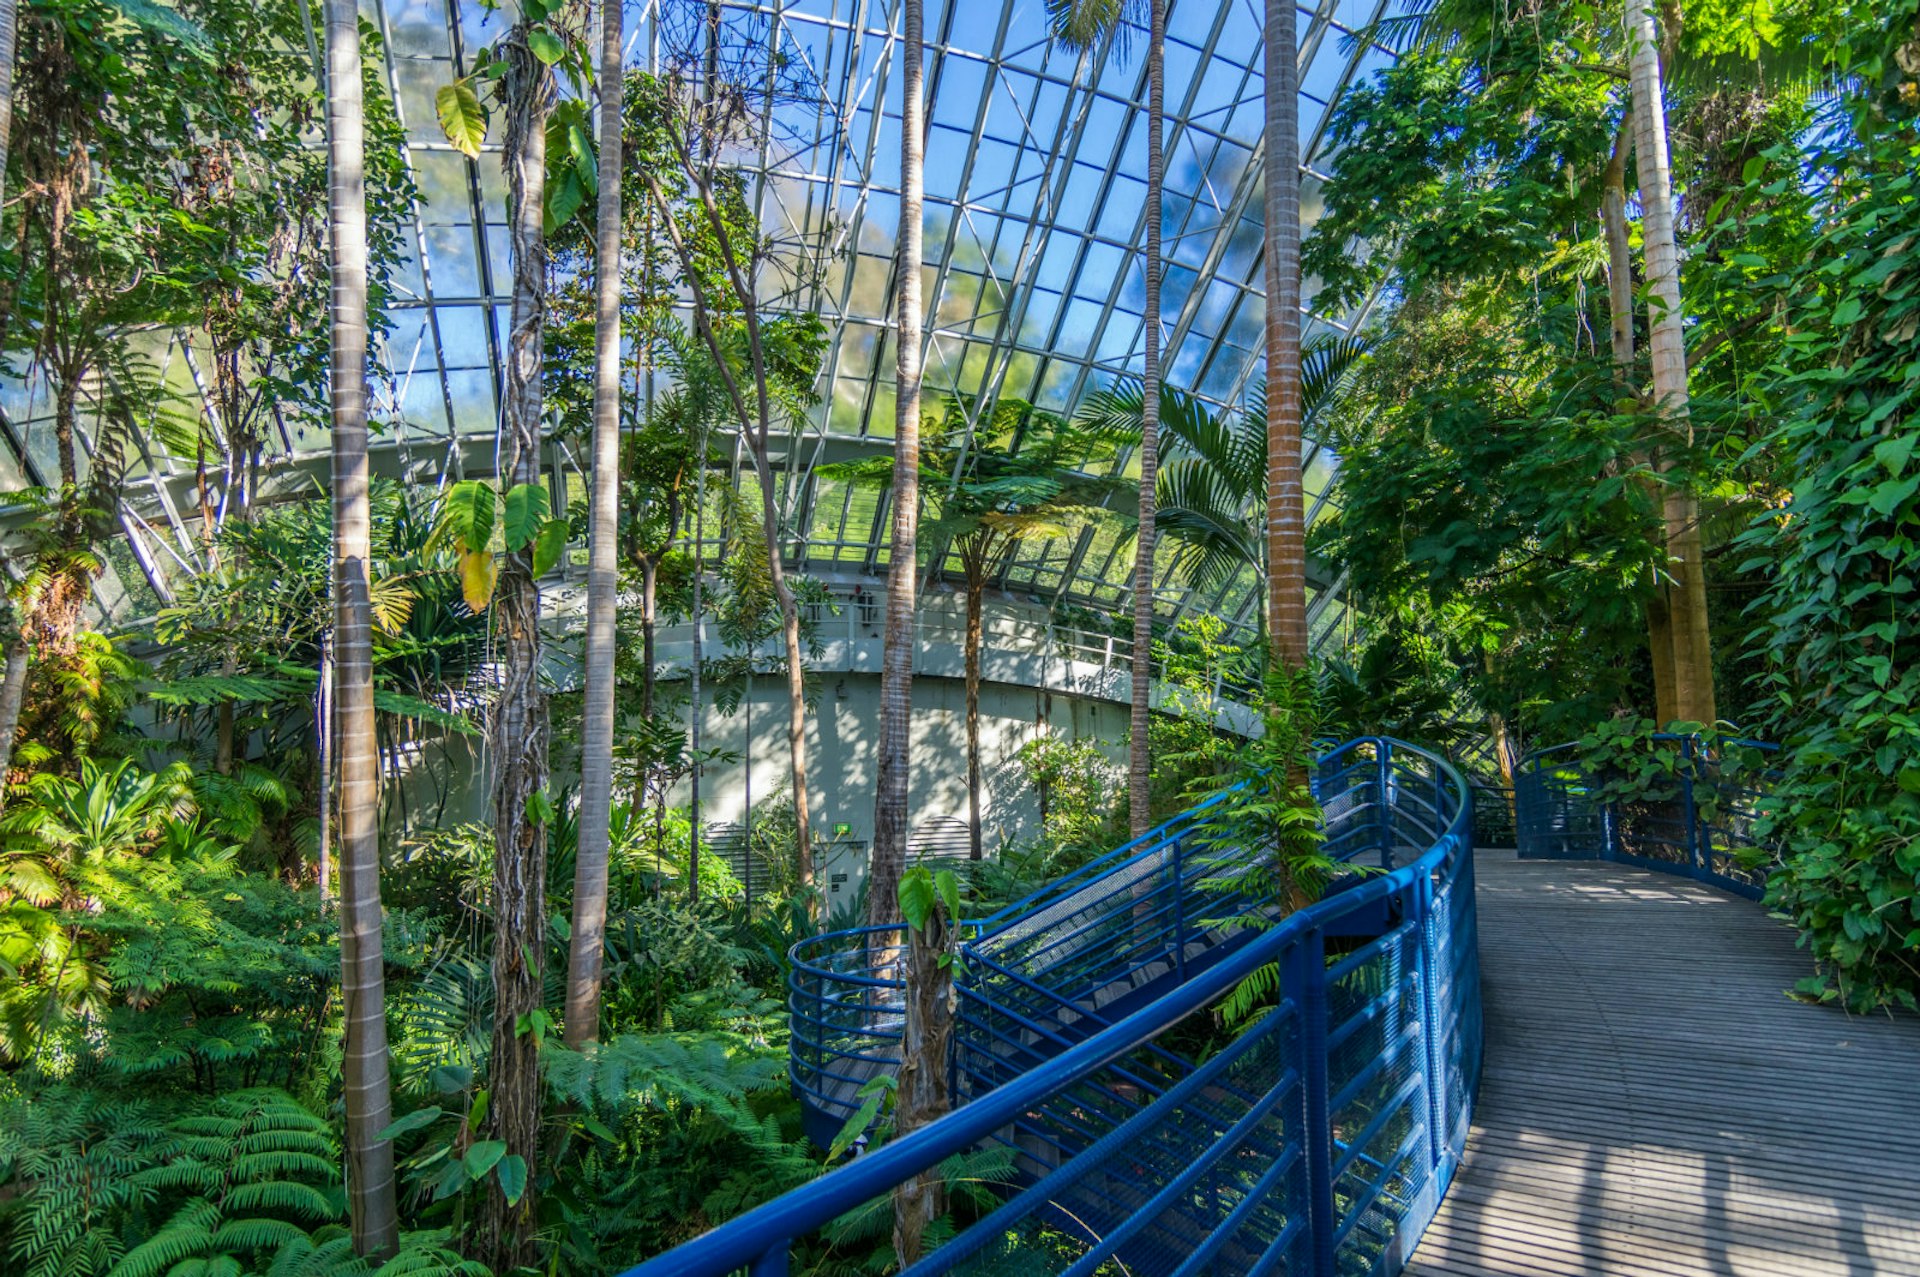 The Botanic Gardens provide hours of fascination and awe